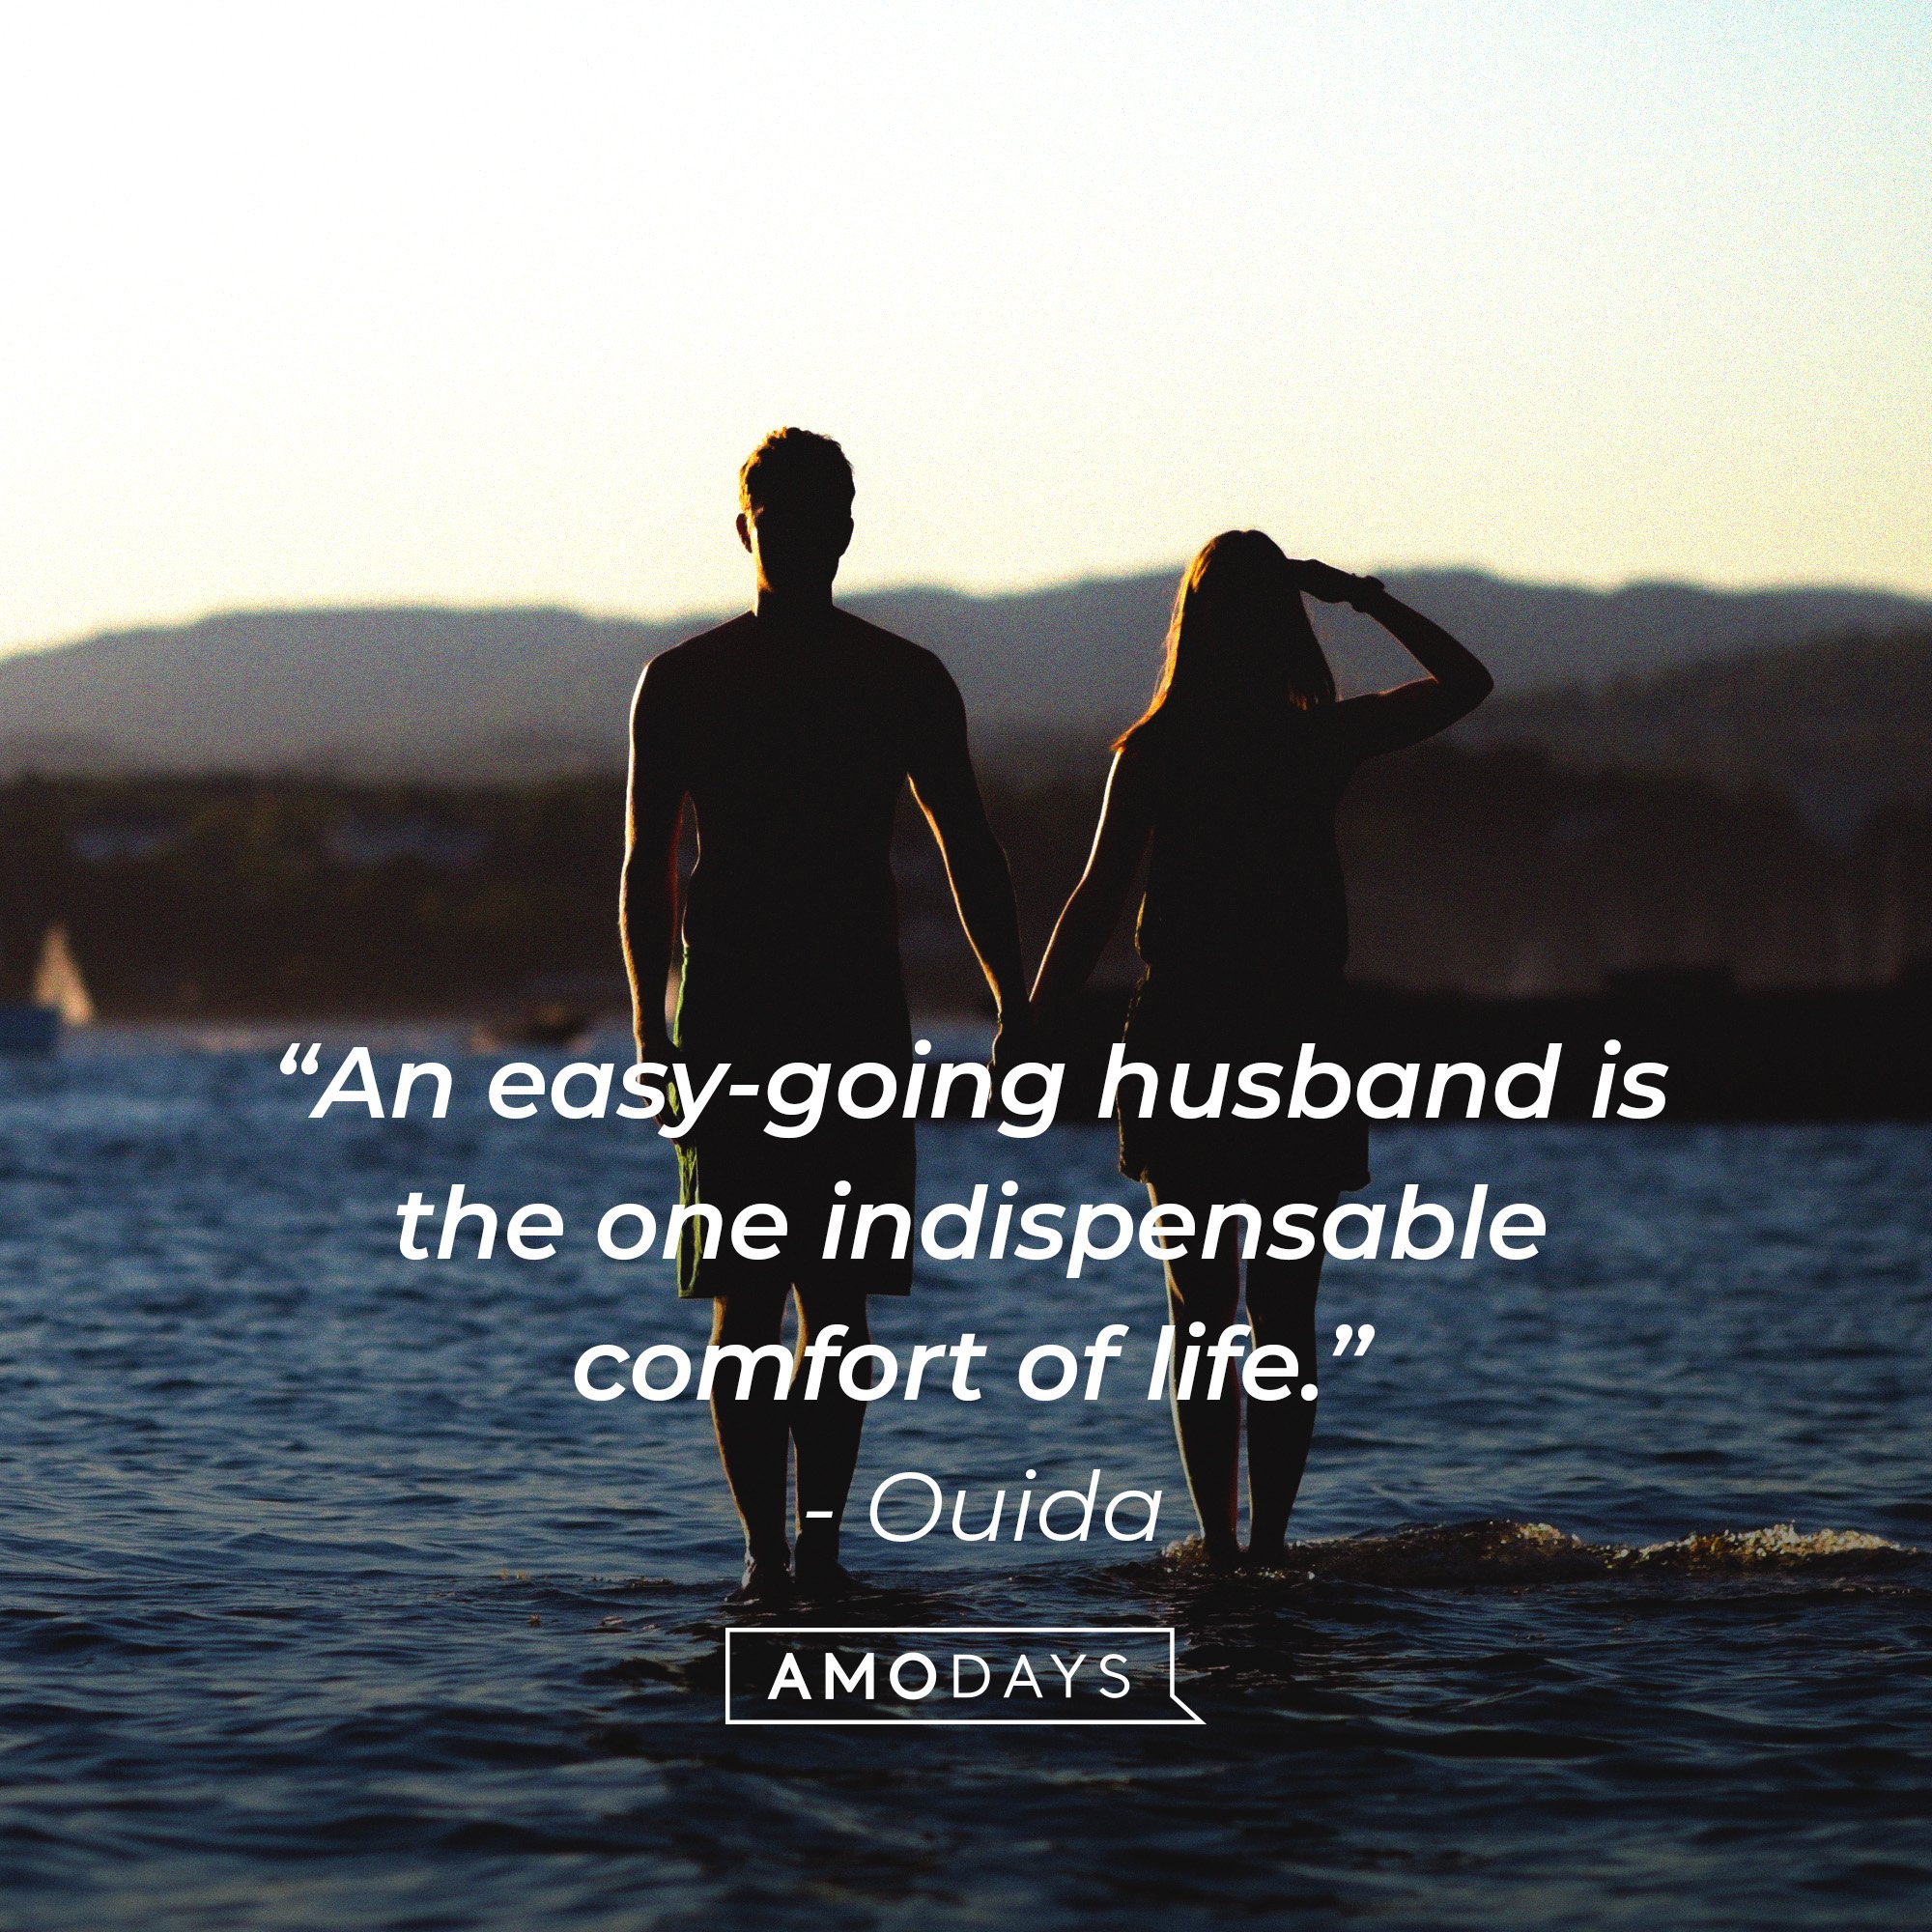 Ouida's quote: “An easy-going husband is the one indispensable comfort of life.” | Image: AmoDays